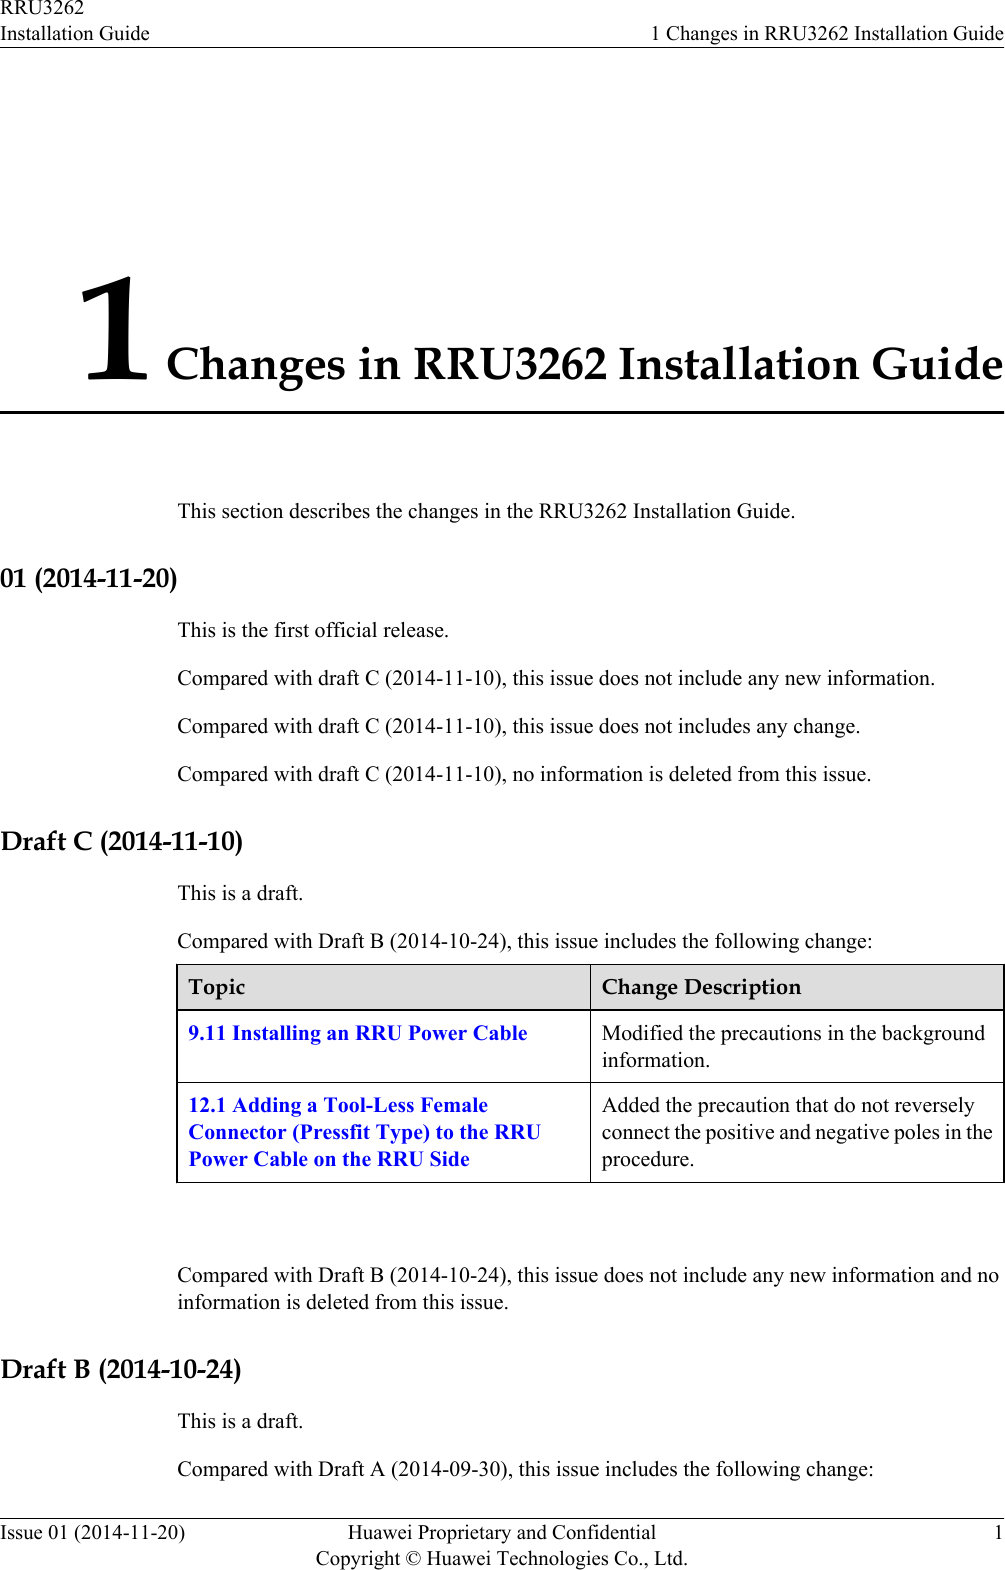 1 Changes in RRU3262 Installation GuideThis section describes the changes in the RRU3262 Installation Guide.01 (2014-11-20)This is the first official release.Compared with draft C (2014-11-10), this issue does not include any new information.Compared with draft C (2014-11-10), this issue does not includes any change.Compared with draft C (2014-11-10), no information is deleted from this issue.Draft C (2014-11-10)This is a draft.Compared with Draft B (2014-10-24), this issue includes the following change:Topic Change Description9.11 Installing an RRU Power Cable Modified the precautions in the backgroundinformation.12.1 Adding a Tool-Less FemaleConnector (Pressfit Type) to the RRUPower Cable on the RRU SideAdded the precaution that do not reverselyconnect the positive and negative poles in theprocedure. Compared with Draft B (2014-10-24), this issue does not include any new information and noinformation is deleted from this issue.Draft B (2014-10-24)This is a draft.Compared with Draft A (2014-09-30), this issue includes the following change:RRU3262Installation Guide 1 Changes in RRU3262 Installation GuideIssue 01 (2014-11-20) Huawei Proprietary and ConfidentialCopyright © Huawei Technologies Co., Ltd.1